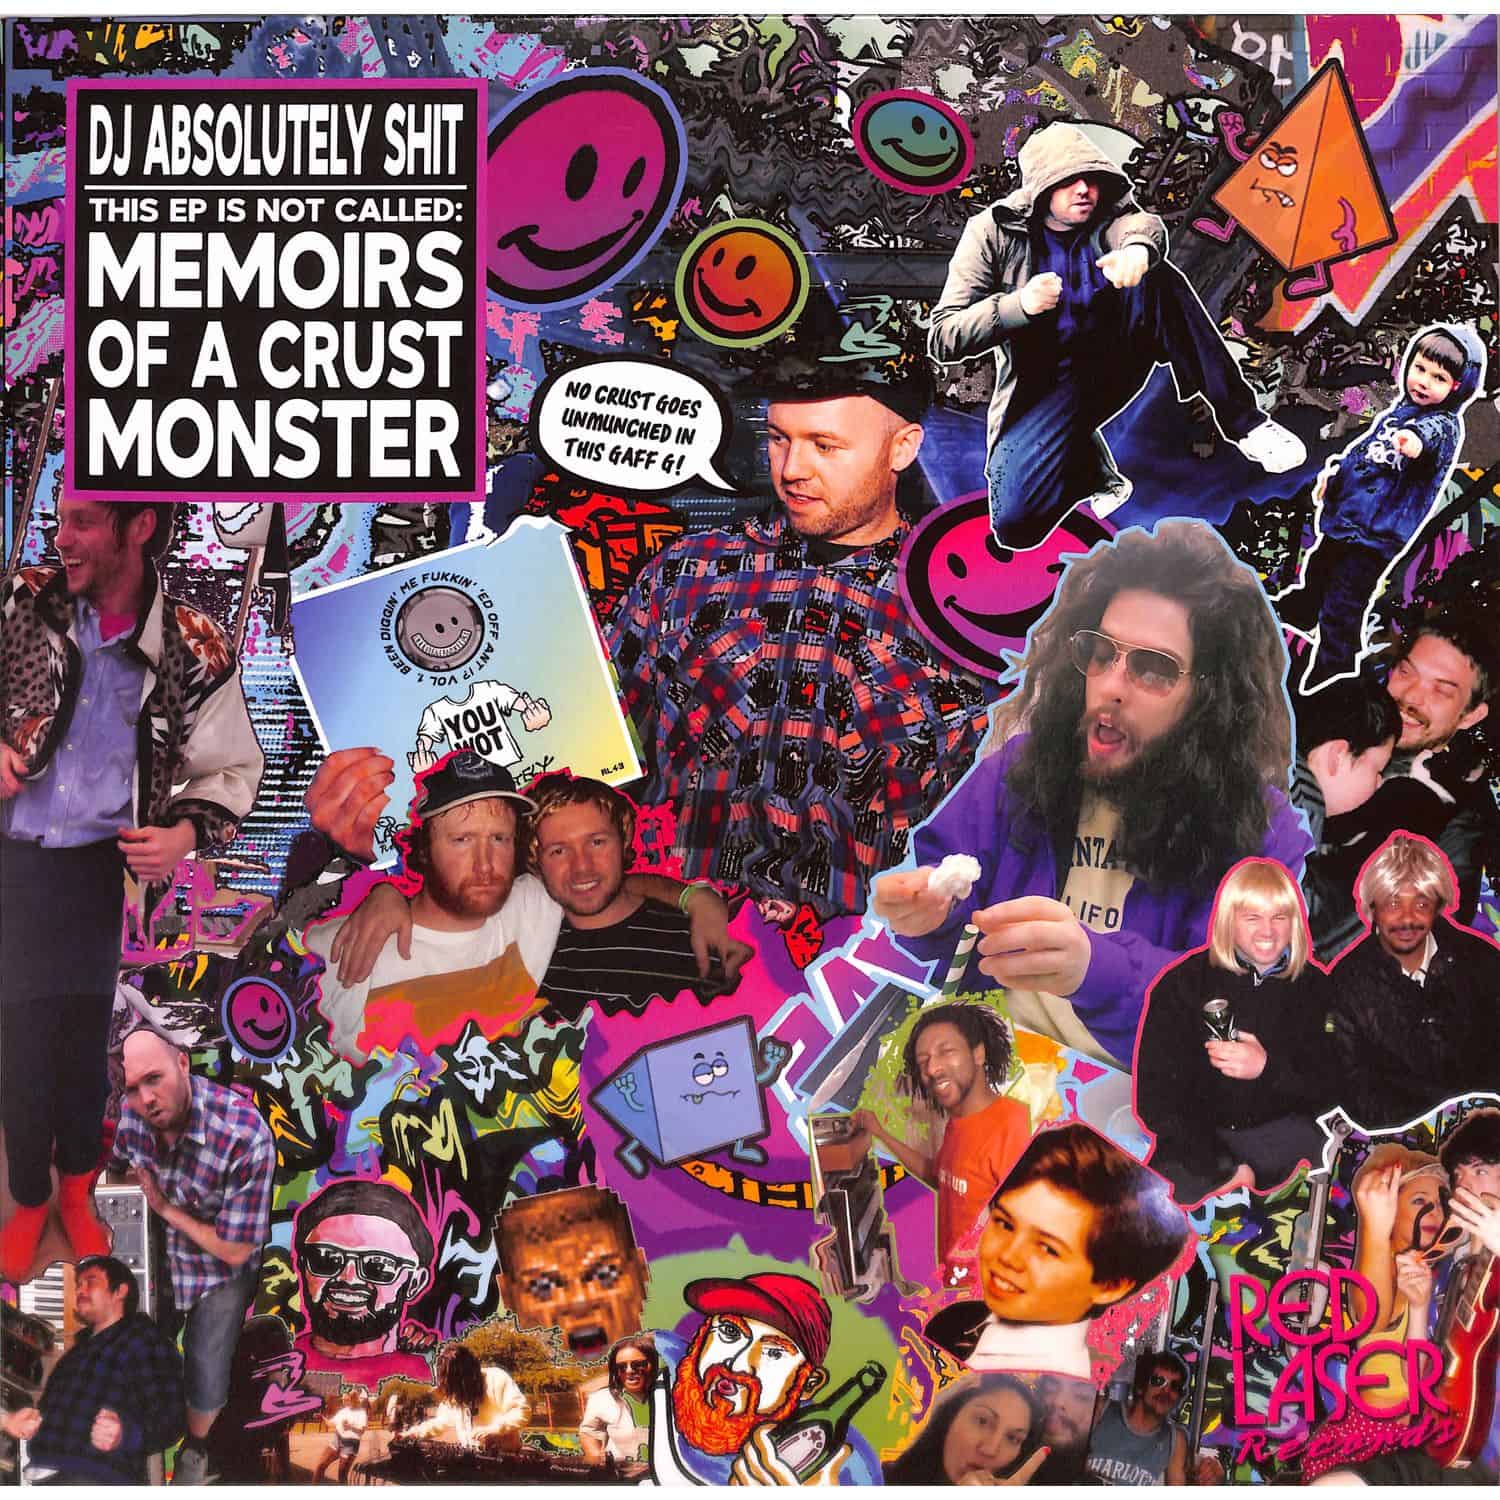 DJ Absolutely Shit - THIS EP IS NOT CALLED MEMOIRS OF A CRUST MONSTER EP